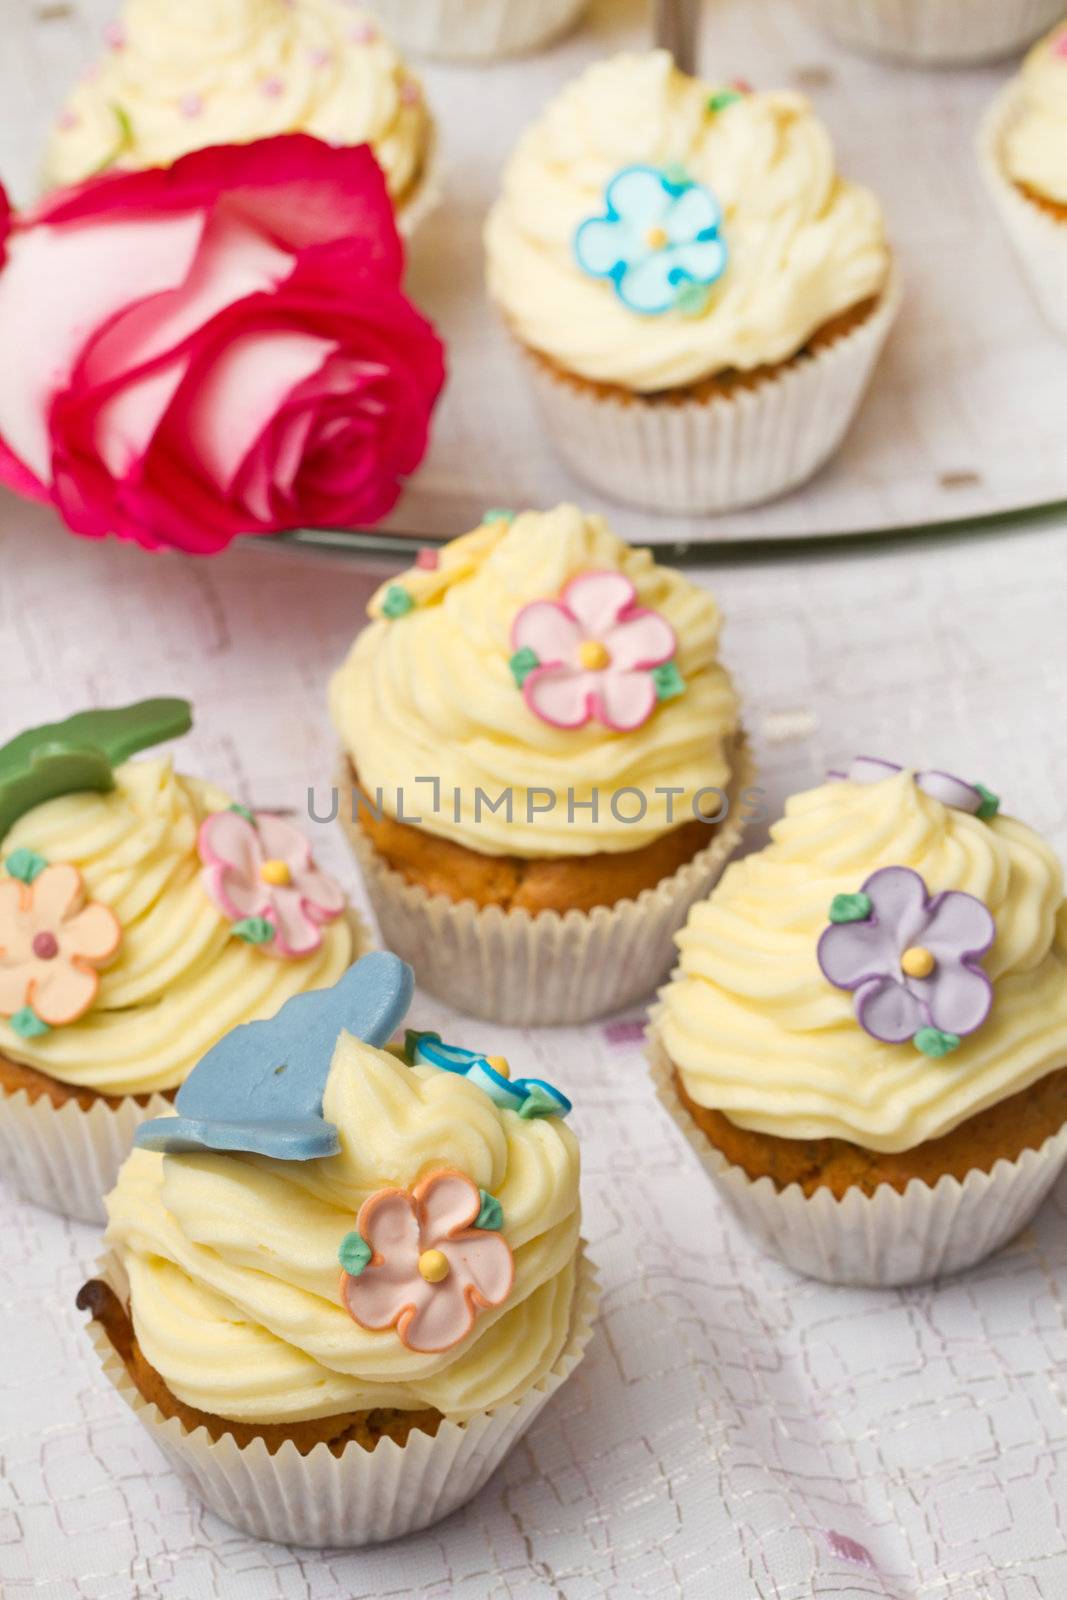 decorated cupcakes by lsantilli